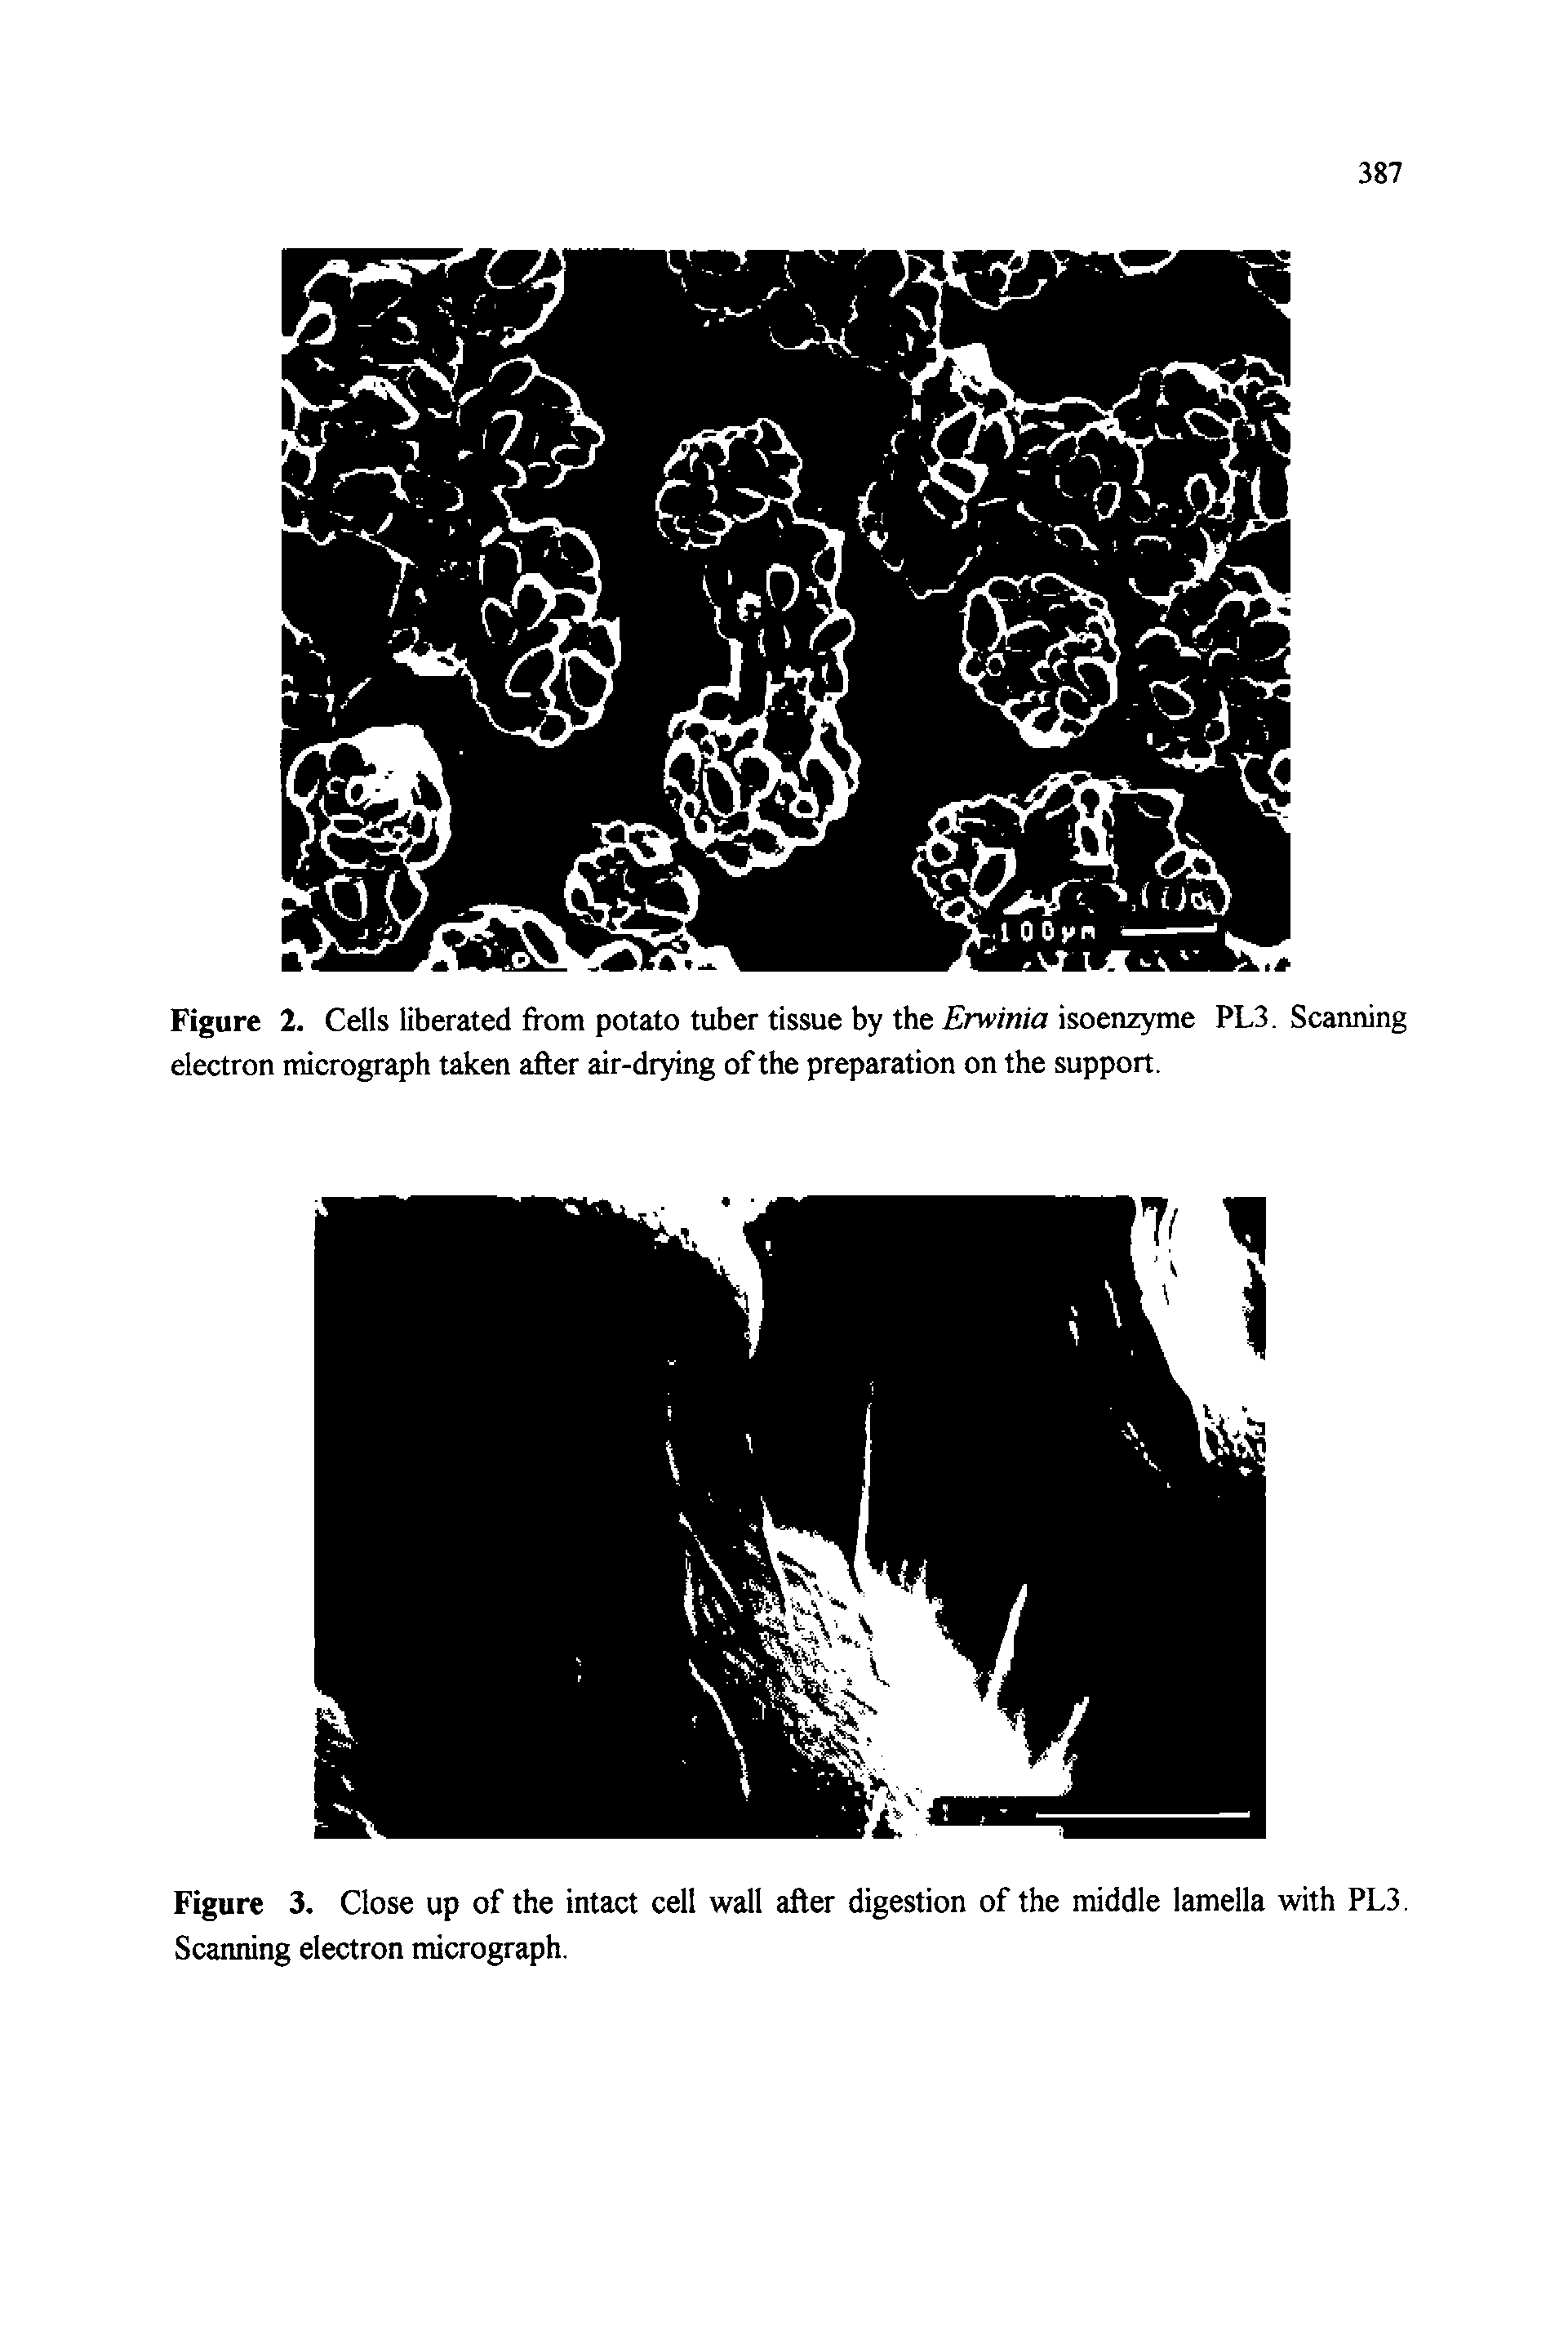 Figure 2. Cells liberated from potato tuber tissue by the jErw/n/a isoenzyme PL3. Scanning electron micrograph taken after air-drying of the preparation on the support.